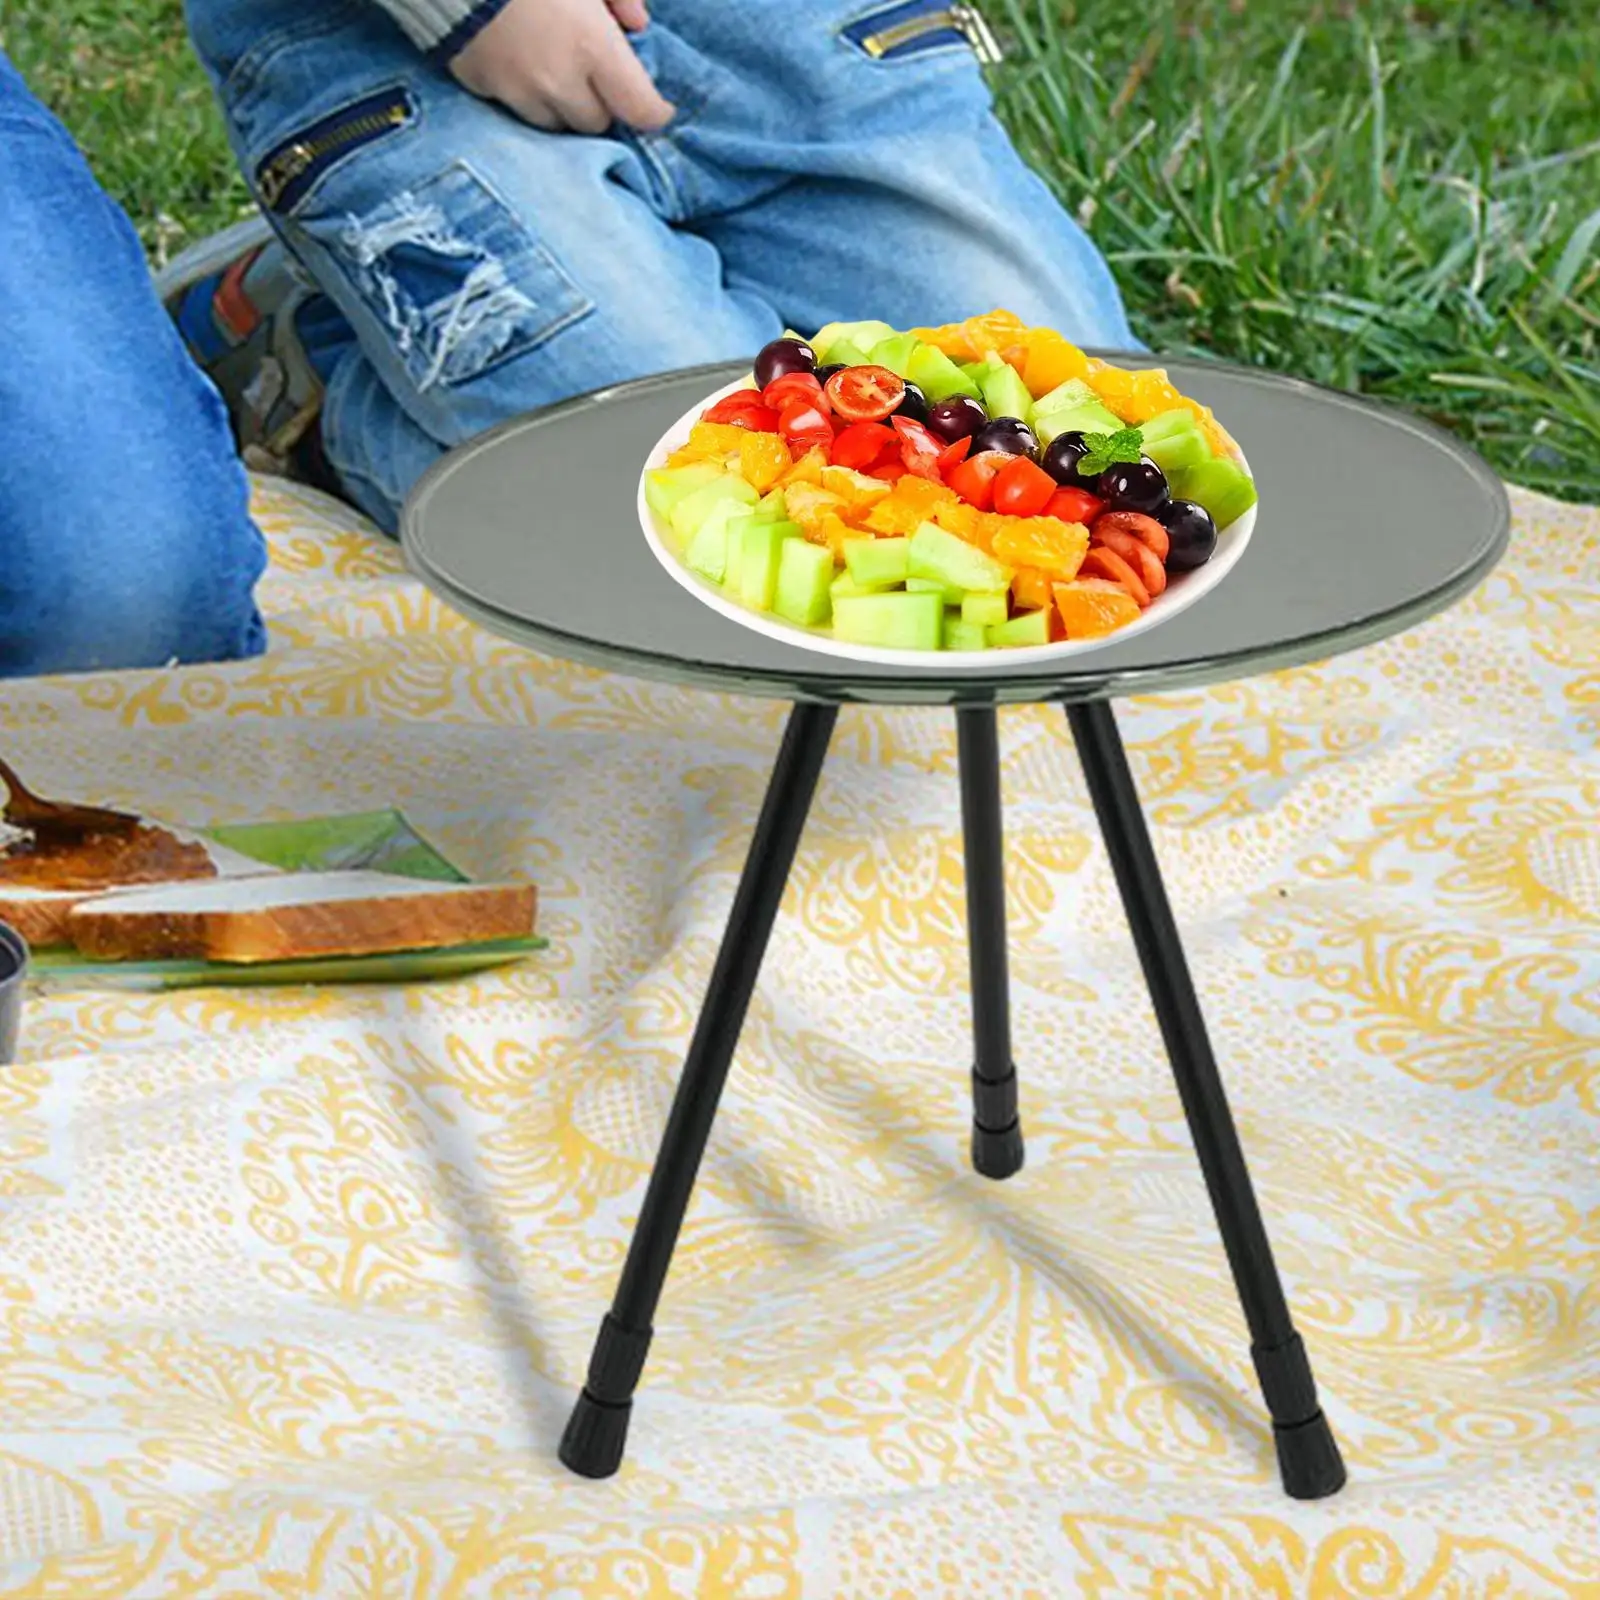 Three Legged Round Table Folding Outdoor Height Adjustable Multifunctional Telescopic Lifting Desk for Barbecue Beach Garden